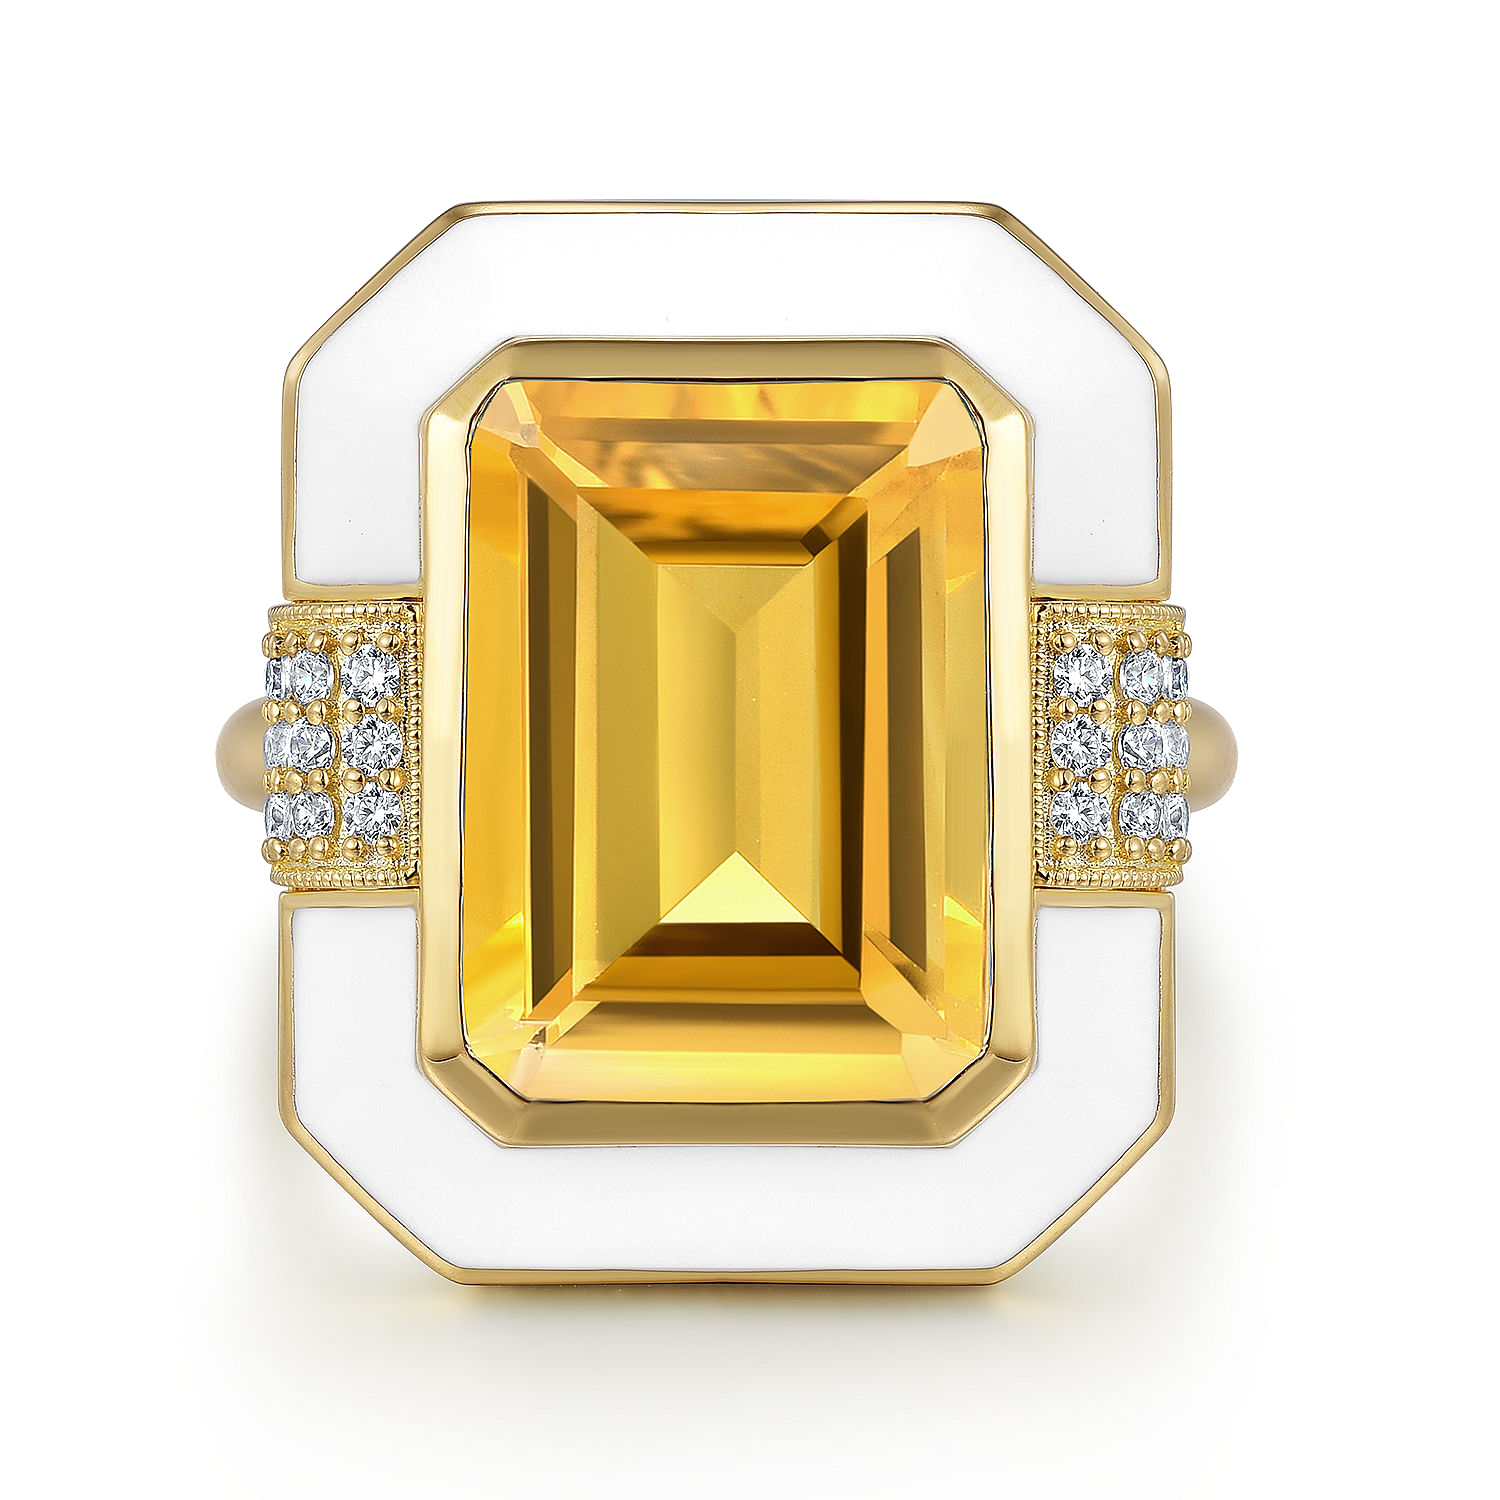 14K Yellow Gold Diamond and Emerald Cut Citrine Fashion Ring With White Enamel